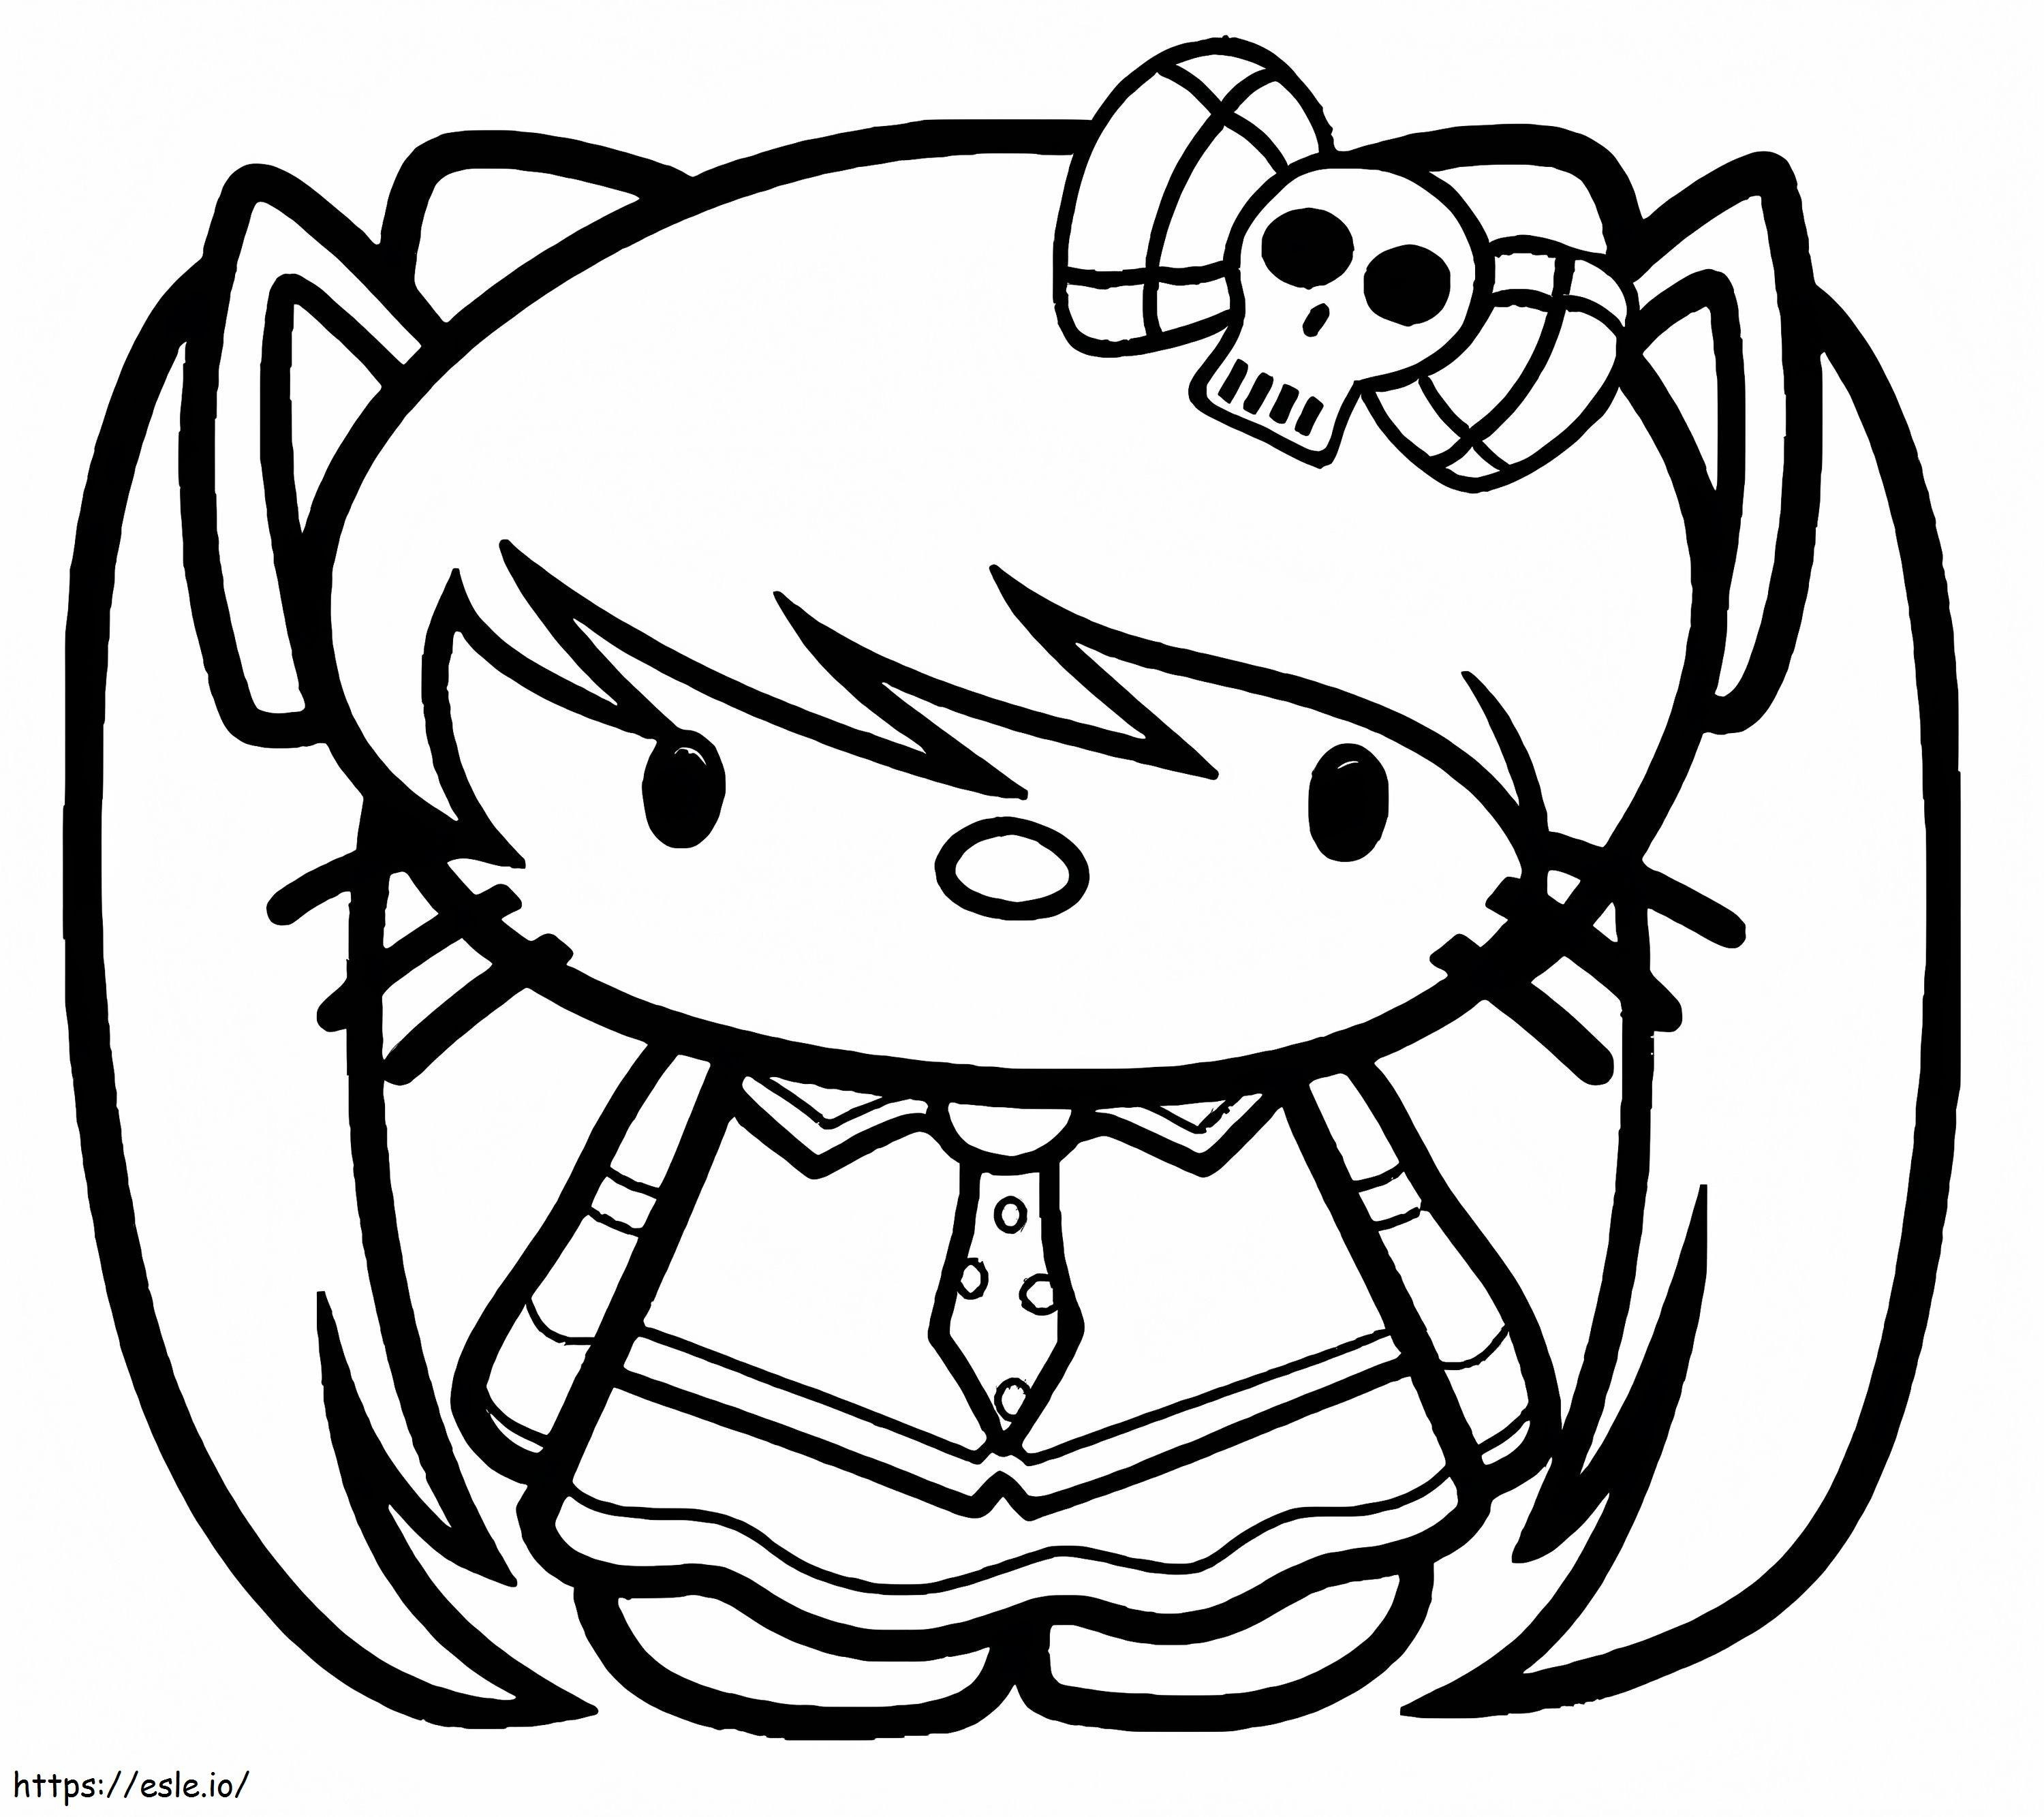 Emo Hello Kitty coloring page